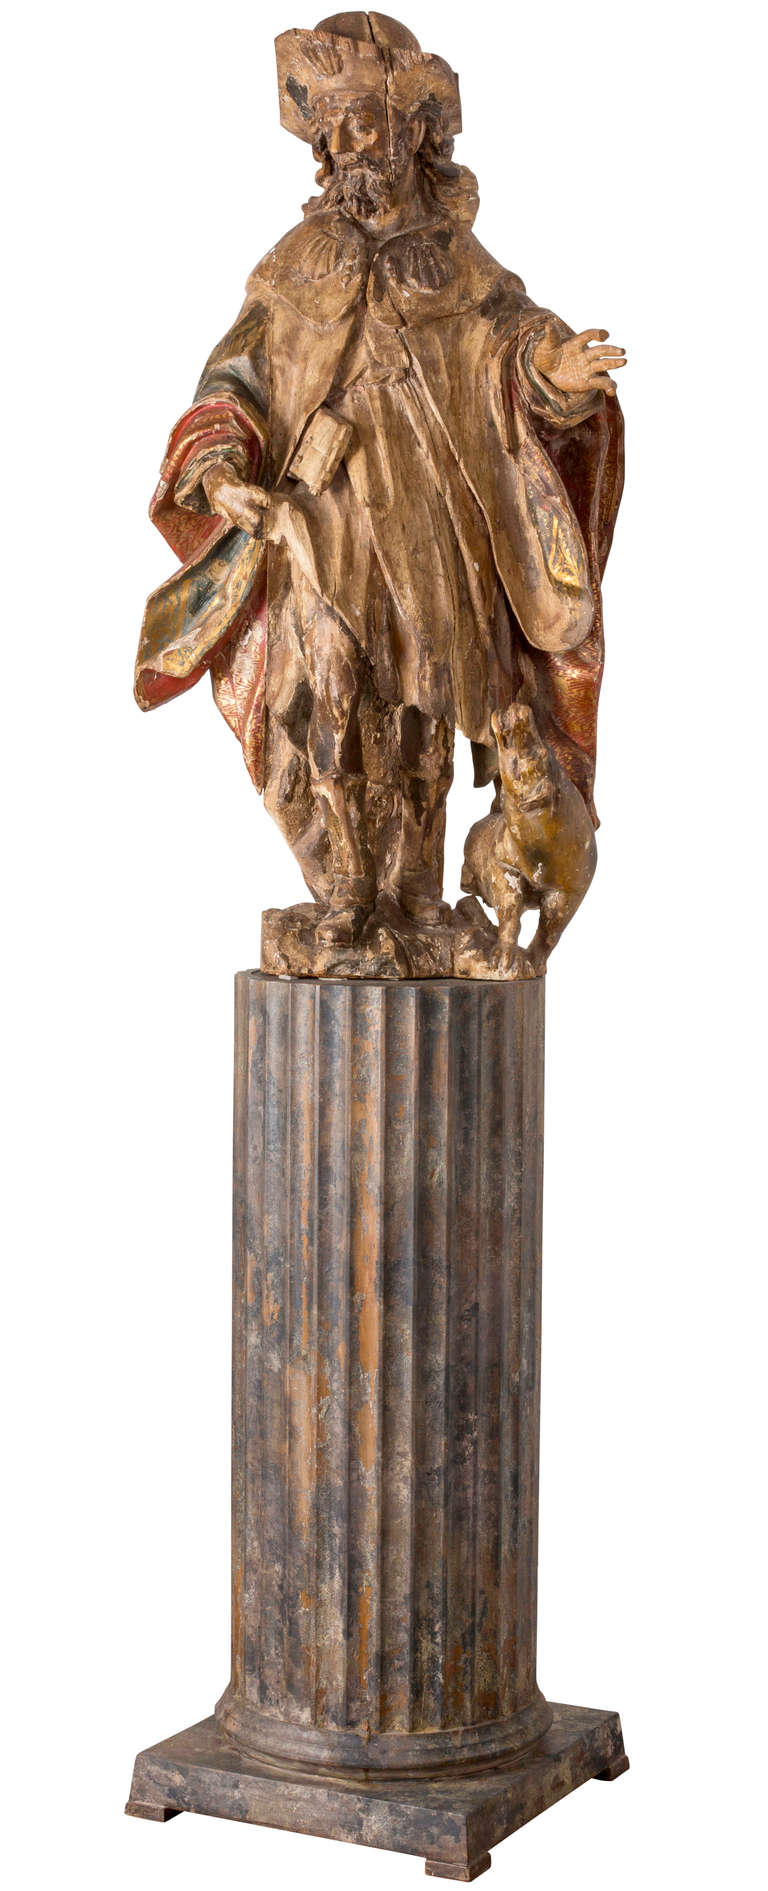 18c. Beautifully carved wood and Polychrome of San Roque, patron saint of dogs.  Sculpture height, 44